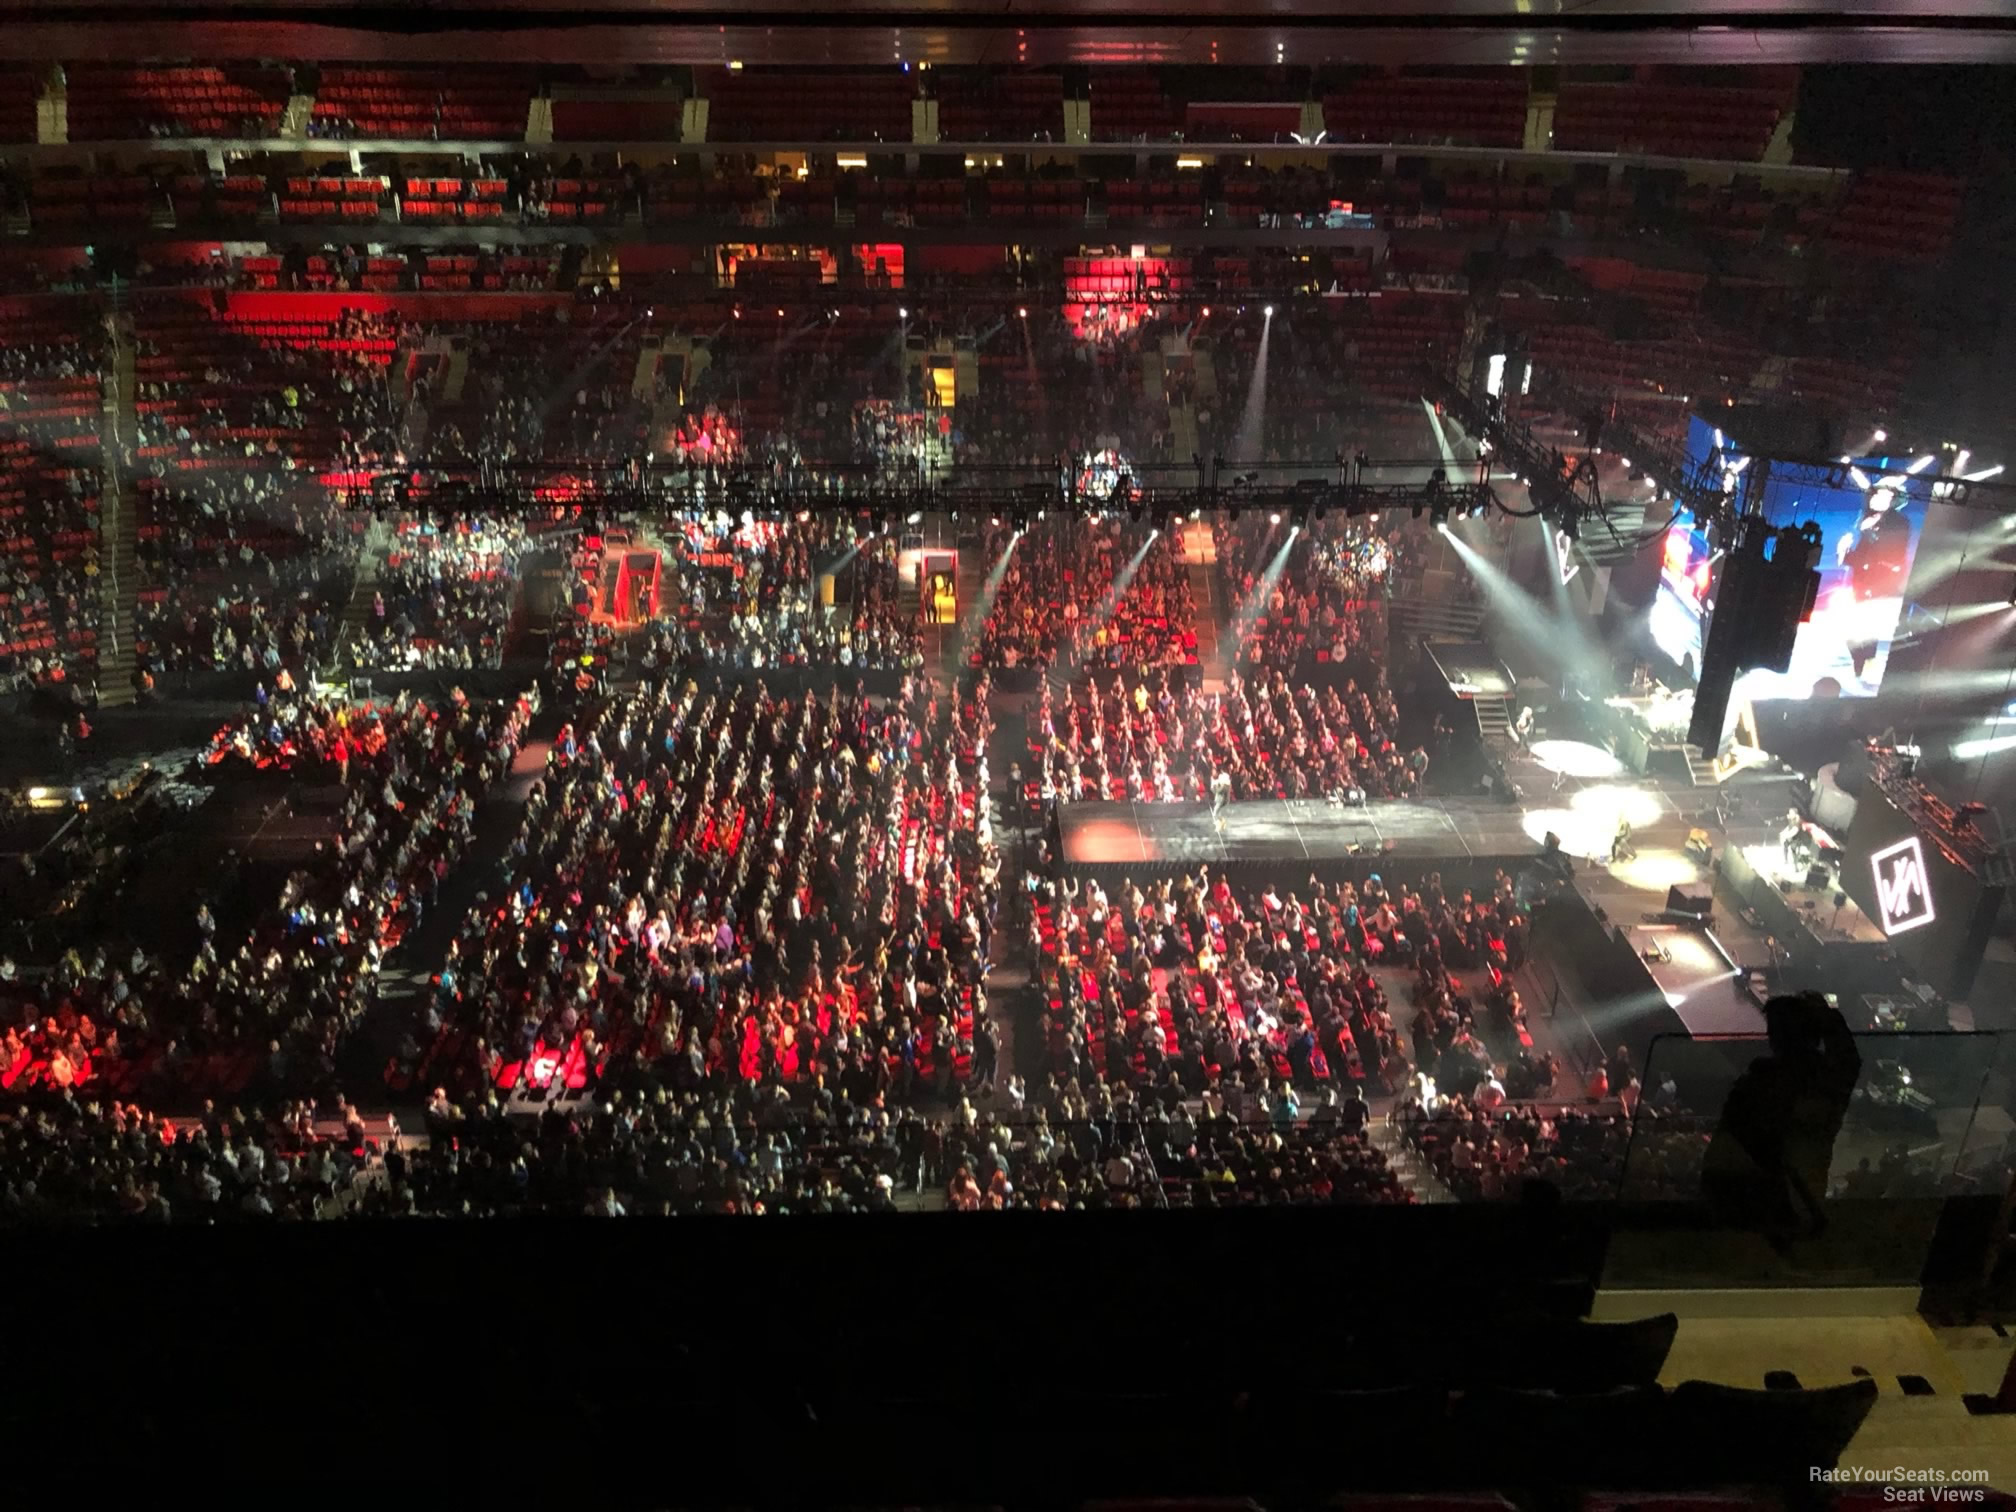 Little Caesars Arena Section 211 Concert Seating Rateyourseats Com